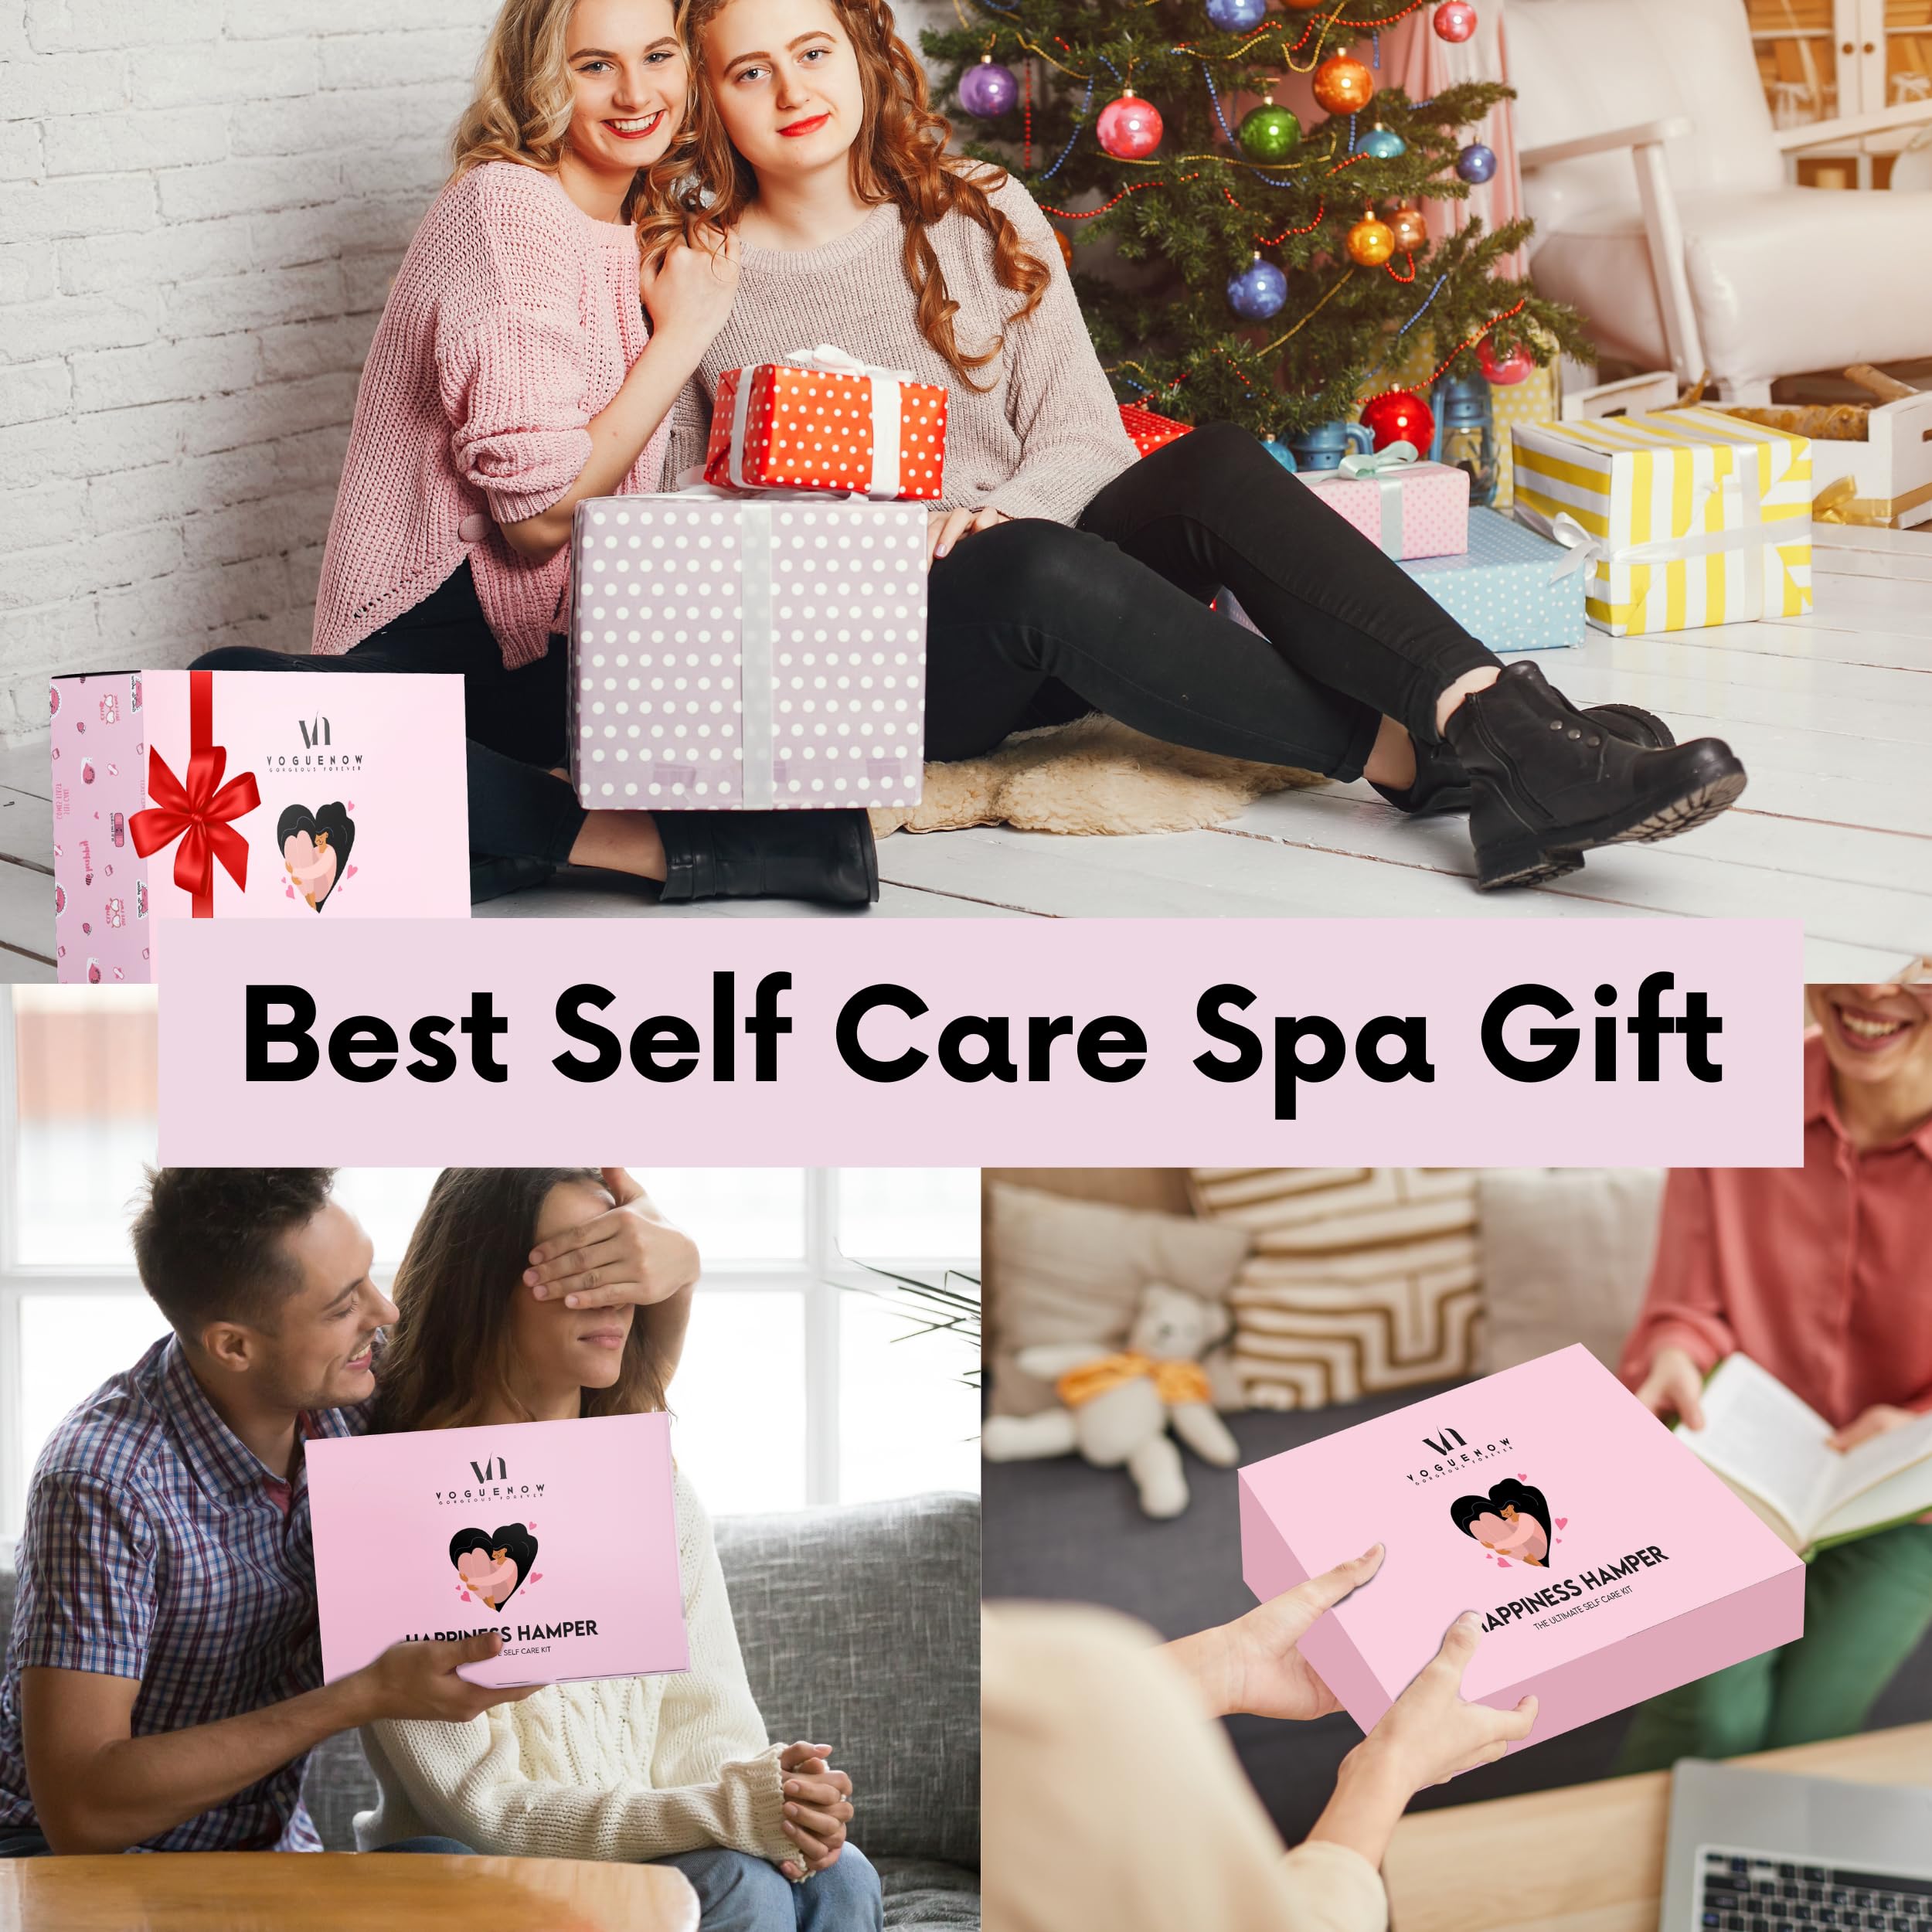 Spa Gifts for Women (Set of 22) - Premium Self Care Spa Kit With Bath, Sleep, Skin Care Sets & Self Care Items For Women Christmas Gifts 2023 - Christmas Gift Sets - Spa Gift Basket for Women